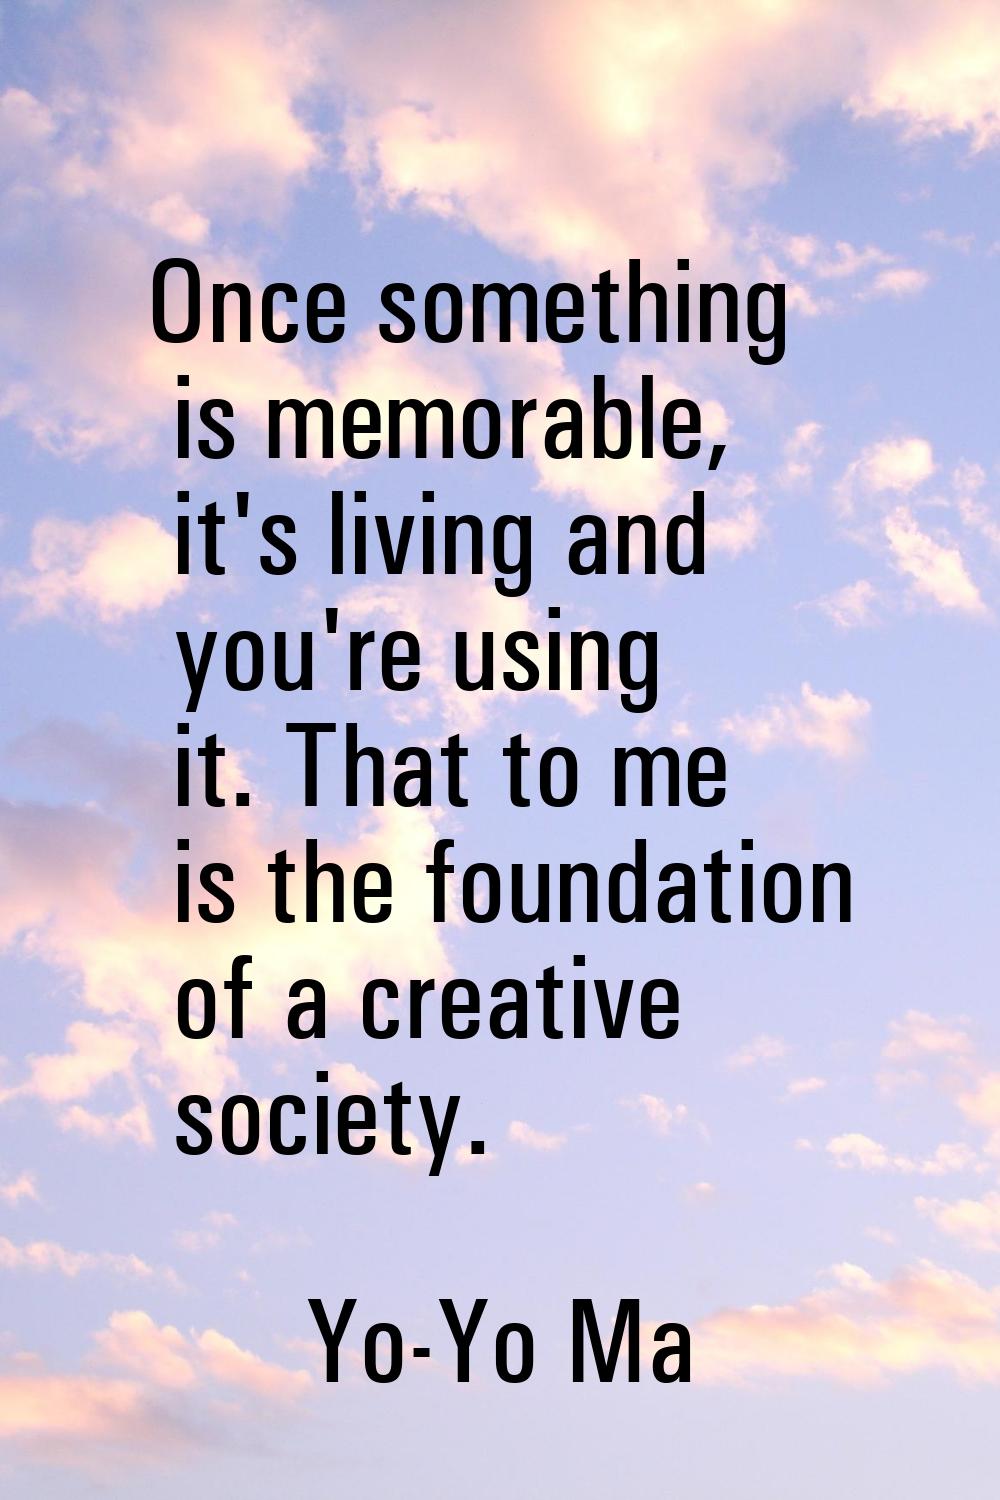 Once something is memorable, it's living and you're using it. That to me is the foundation of a cre